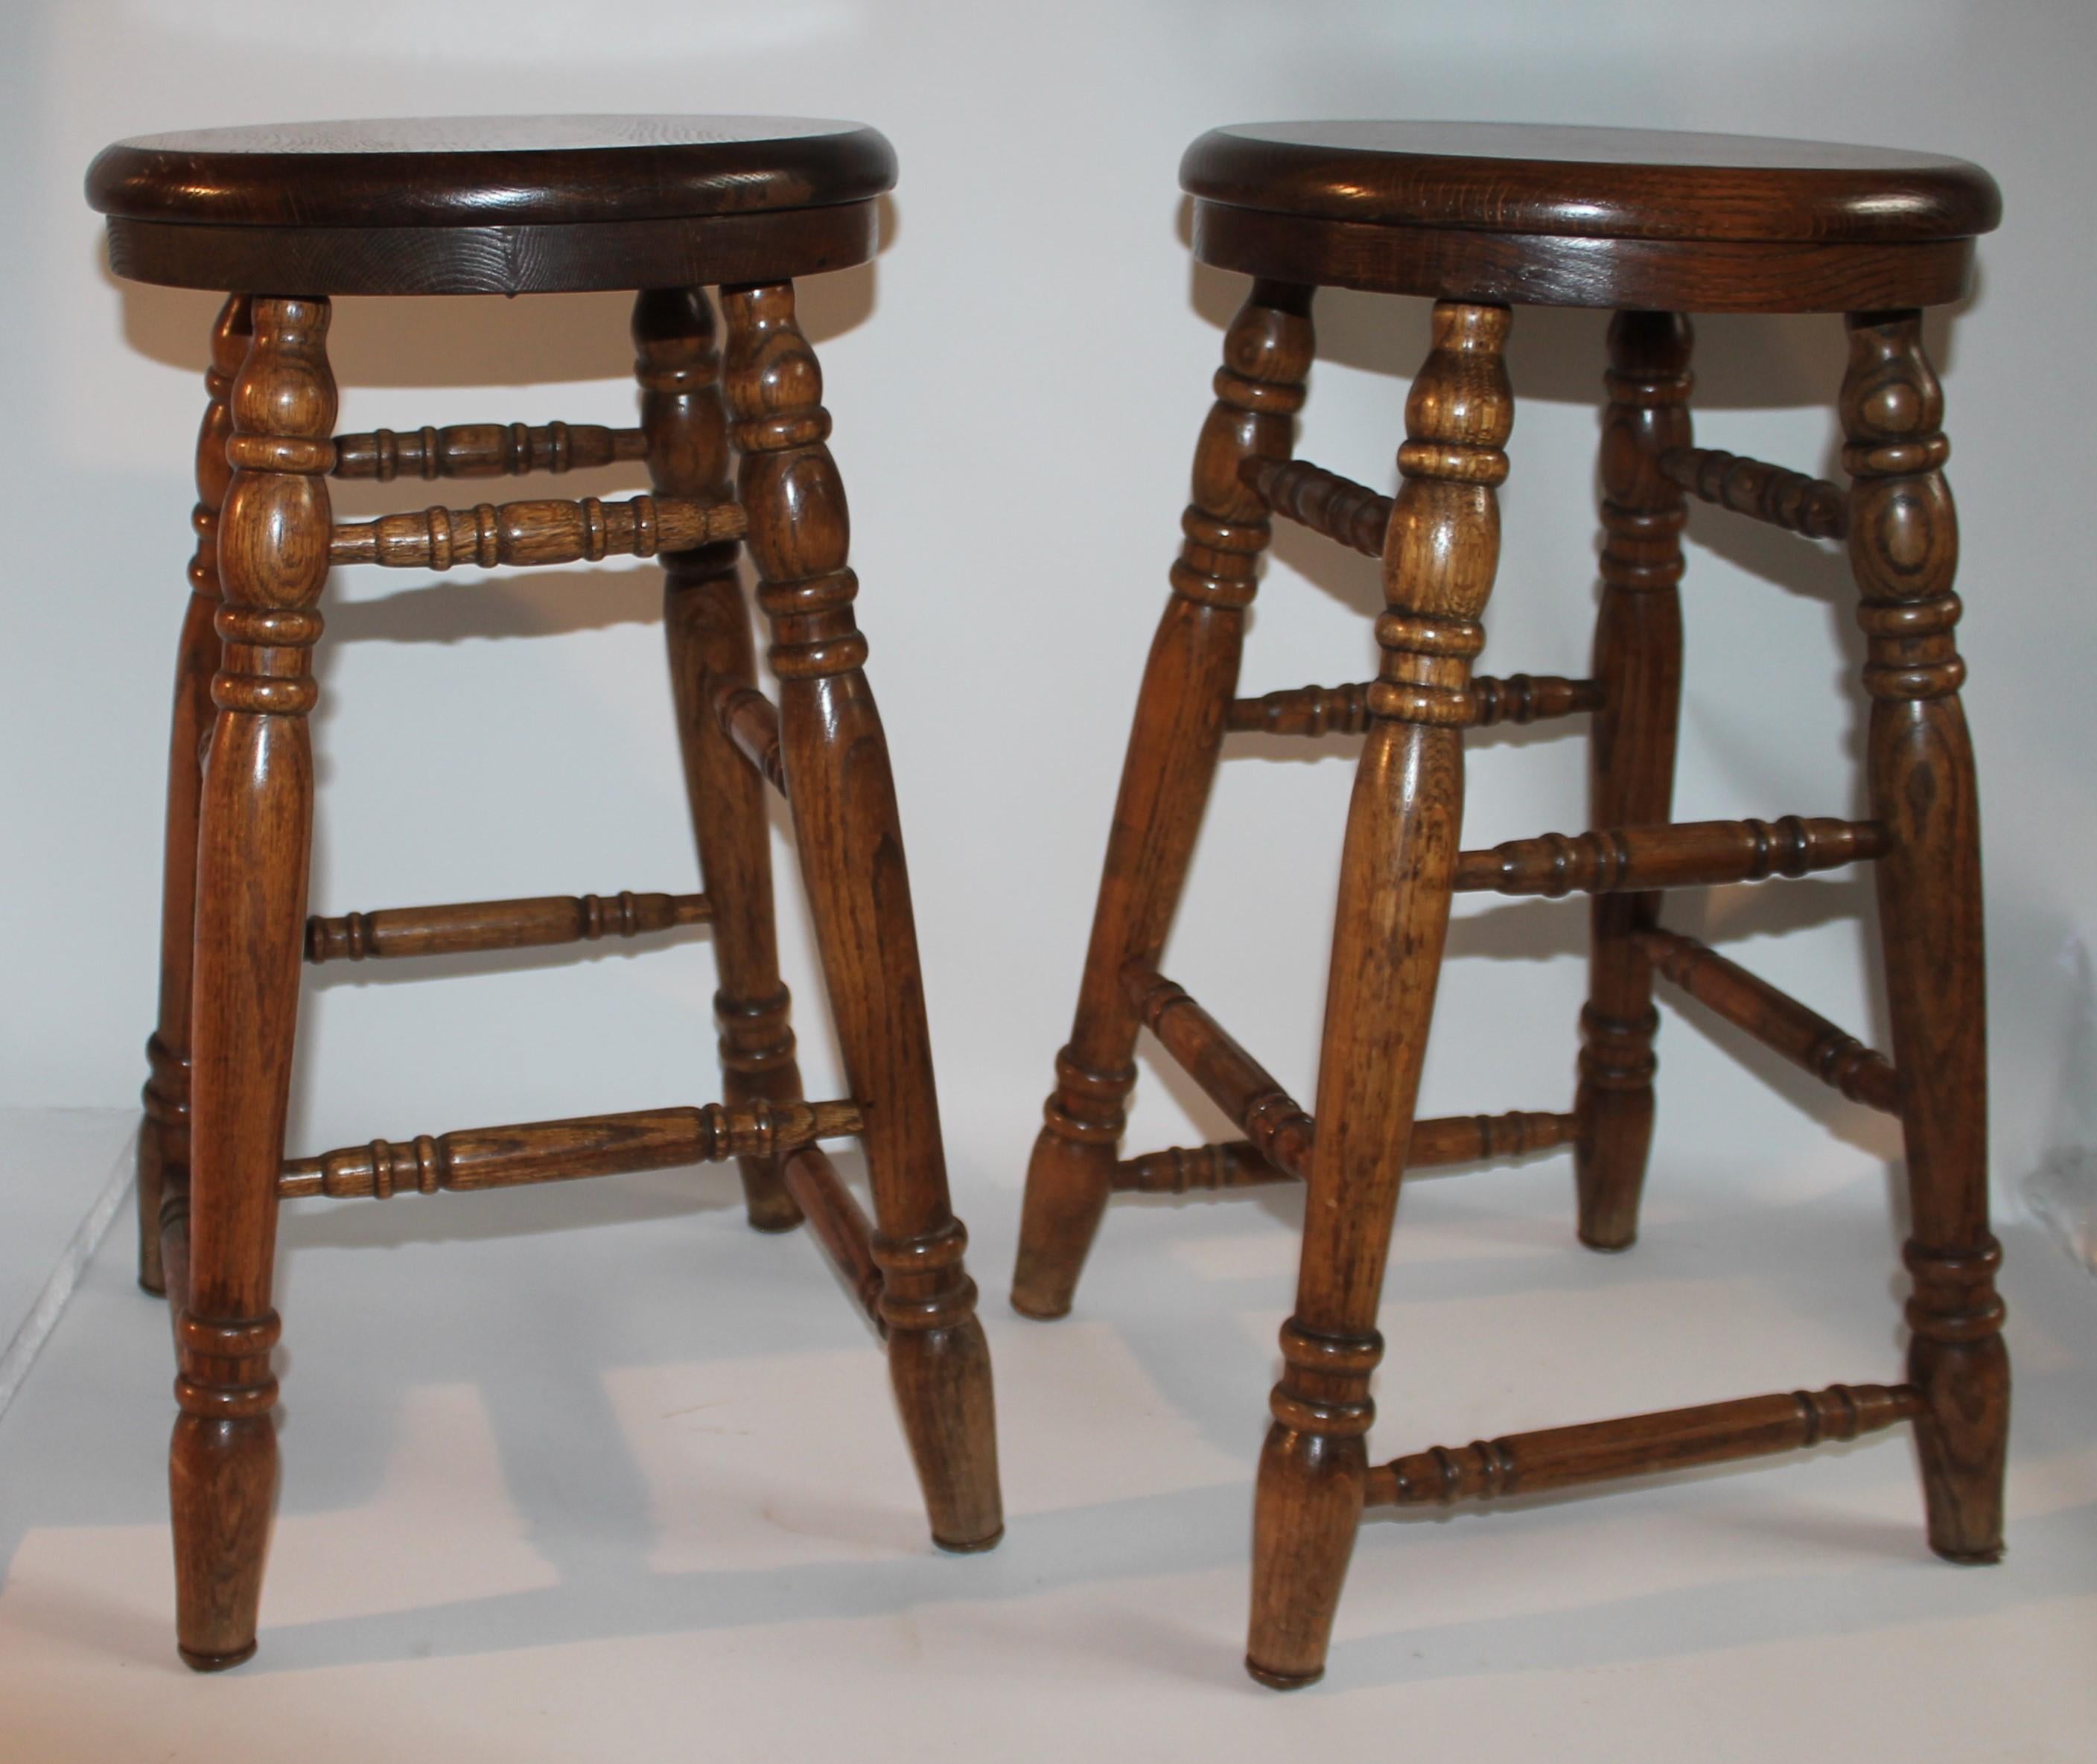 Pair of oak plank seat bar stools from the mid century. These stools are very strong & sturdy. They are very comfortable and in fine condition.
Seat diameter measures 13.25 inches.